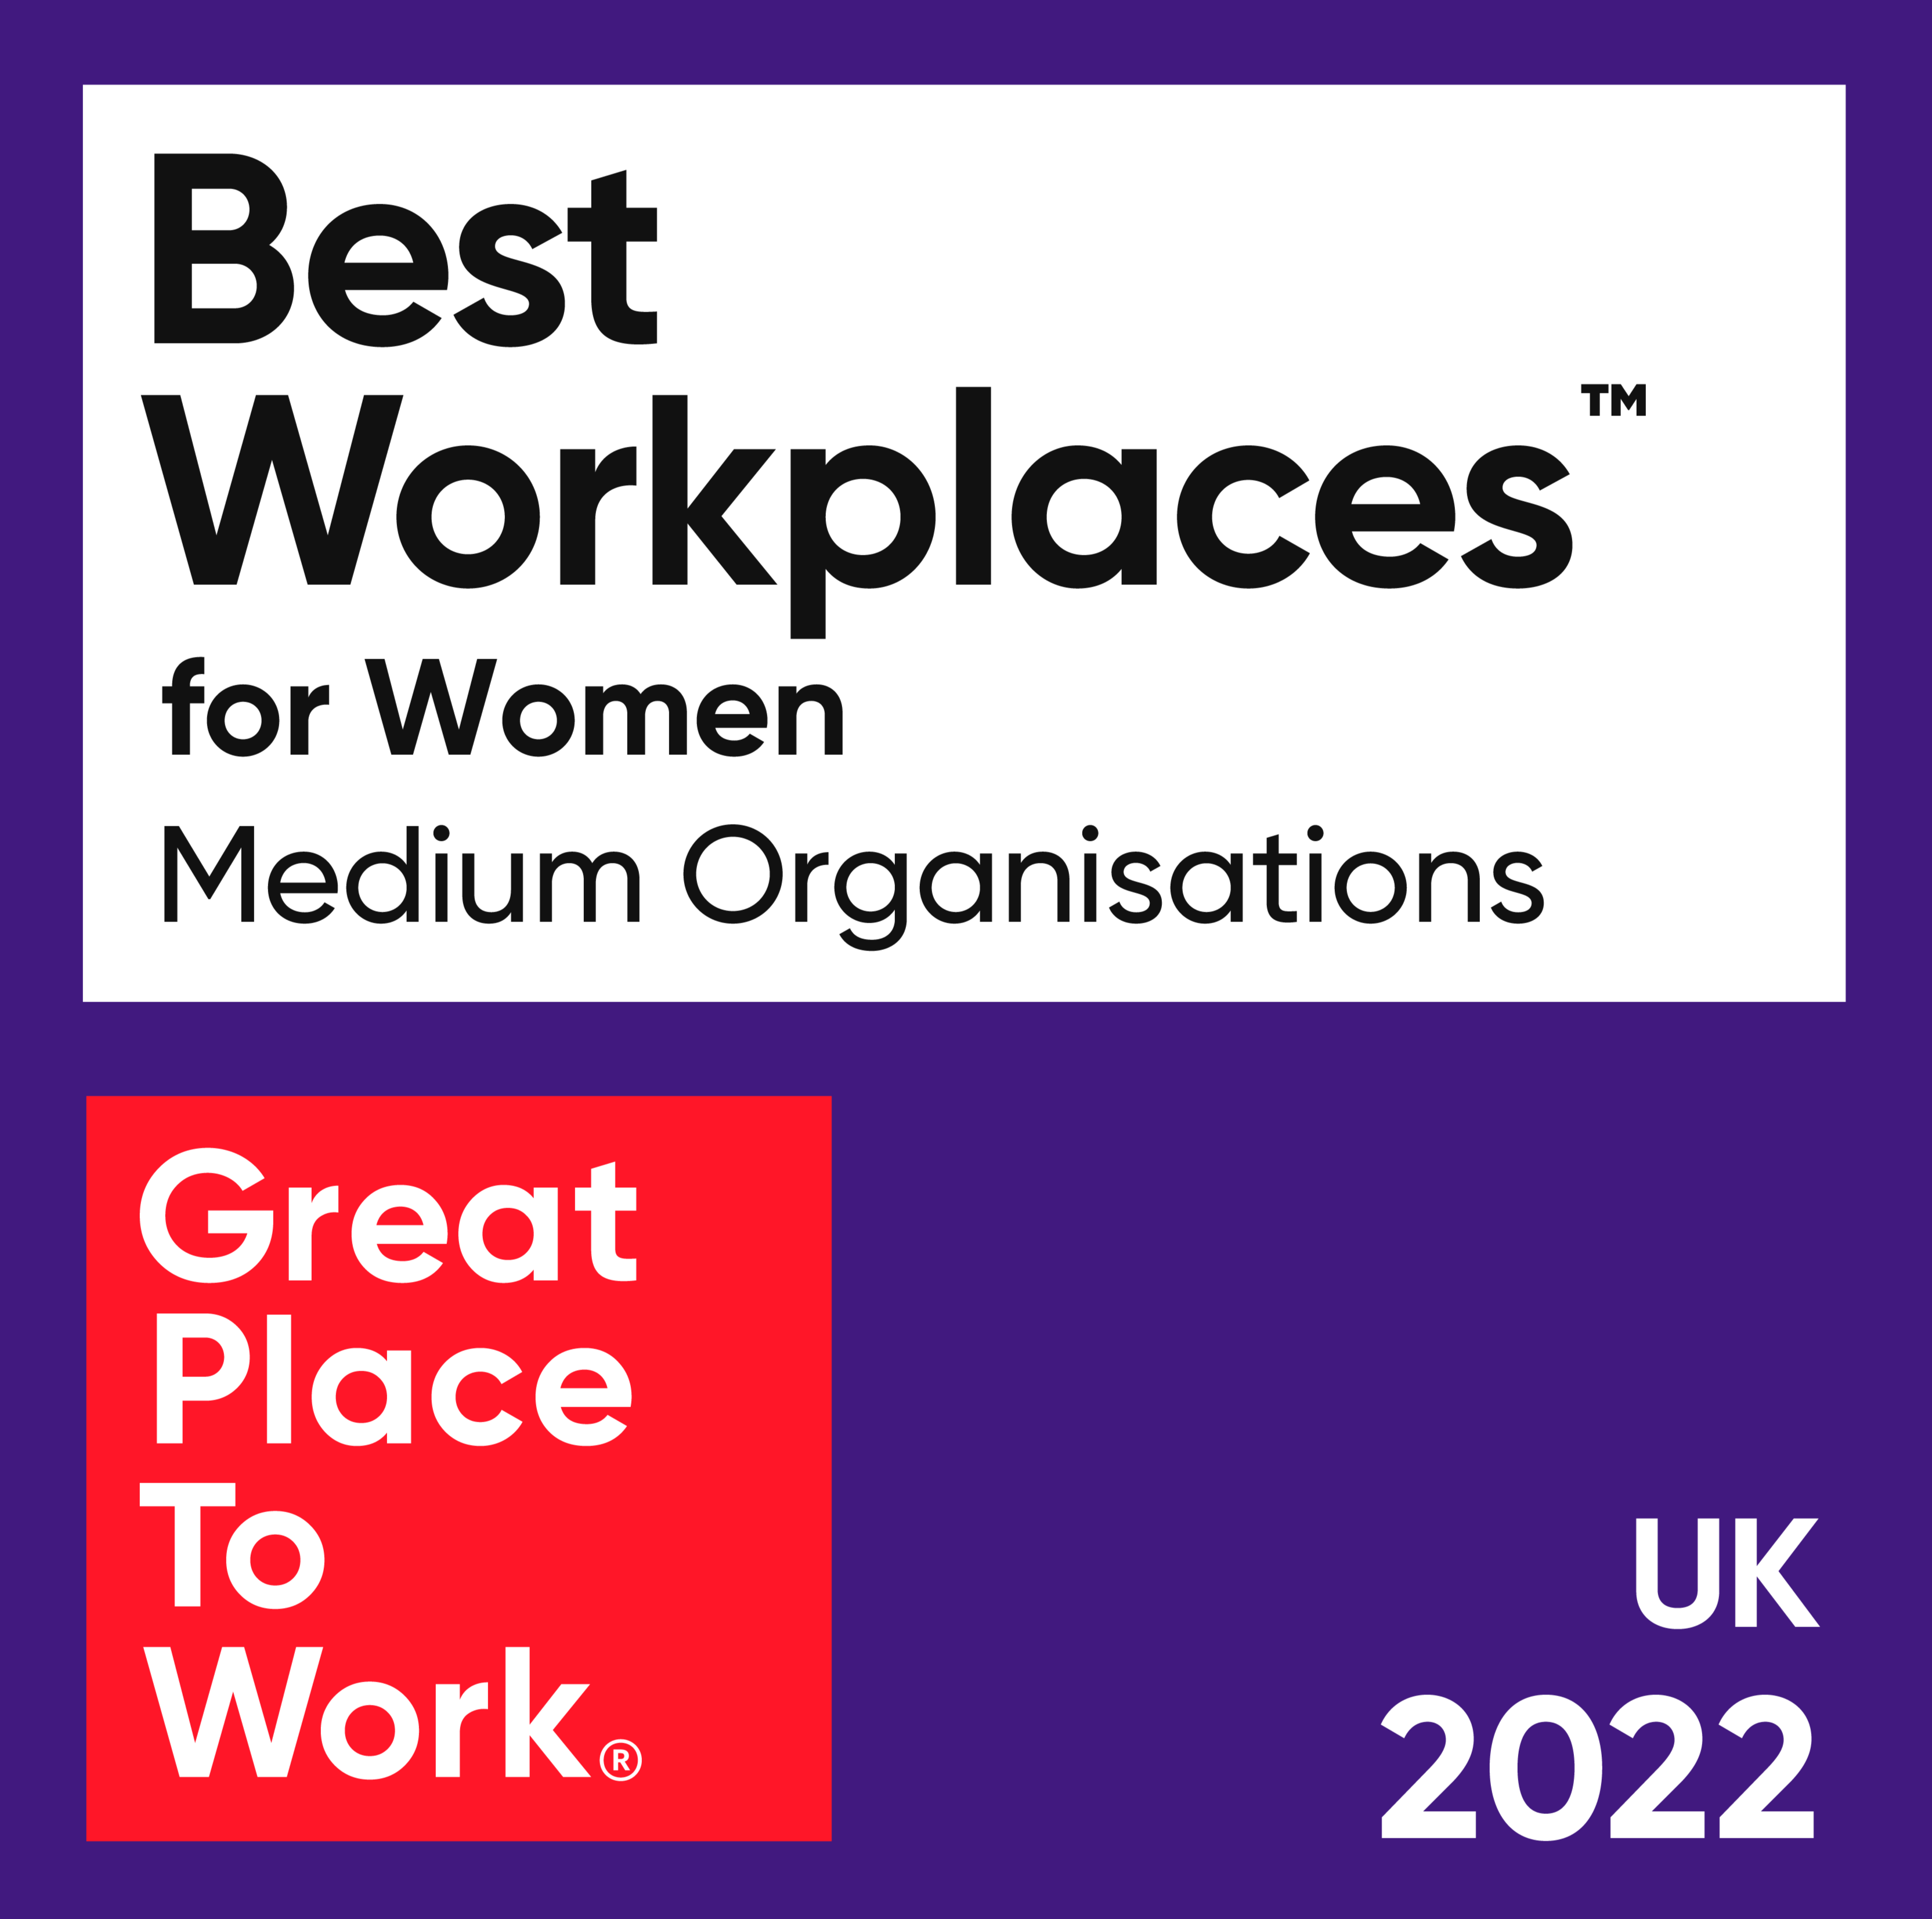 2022 UK's Best Workplaces for Women logo